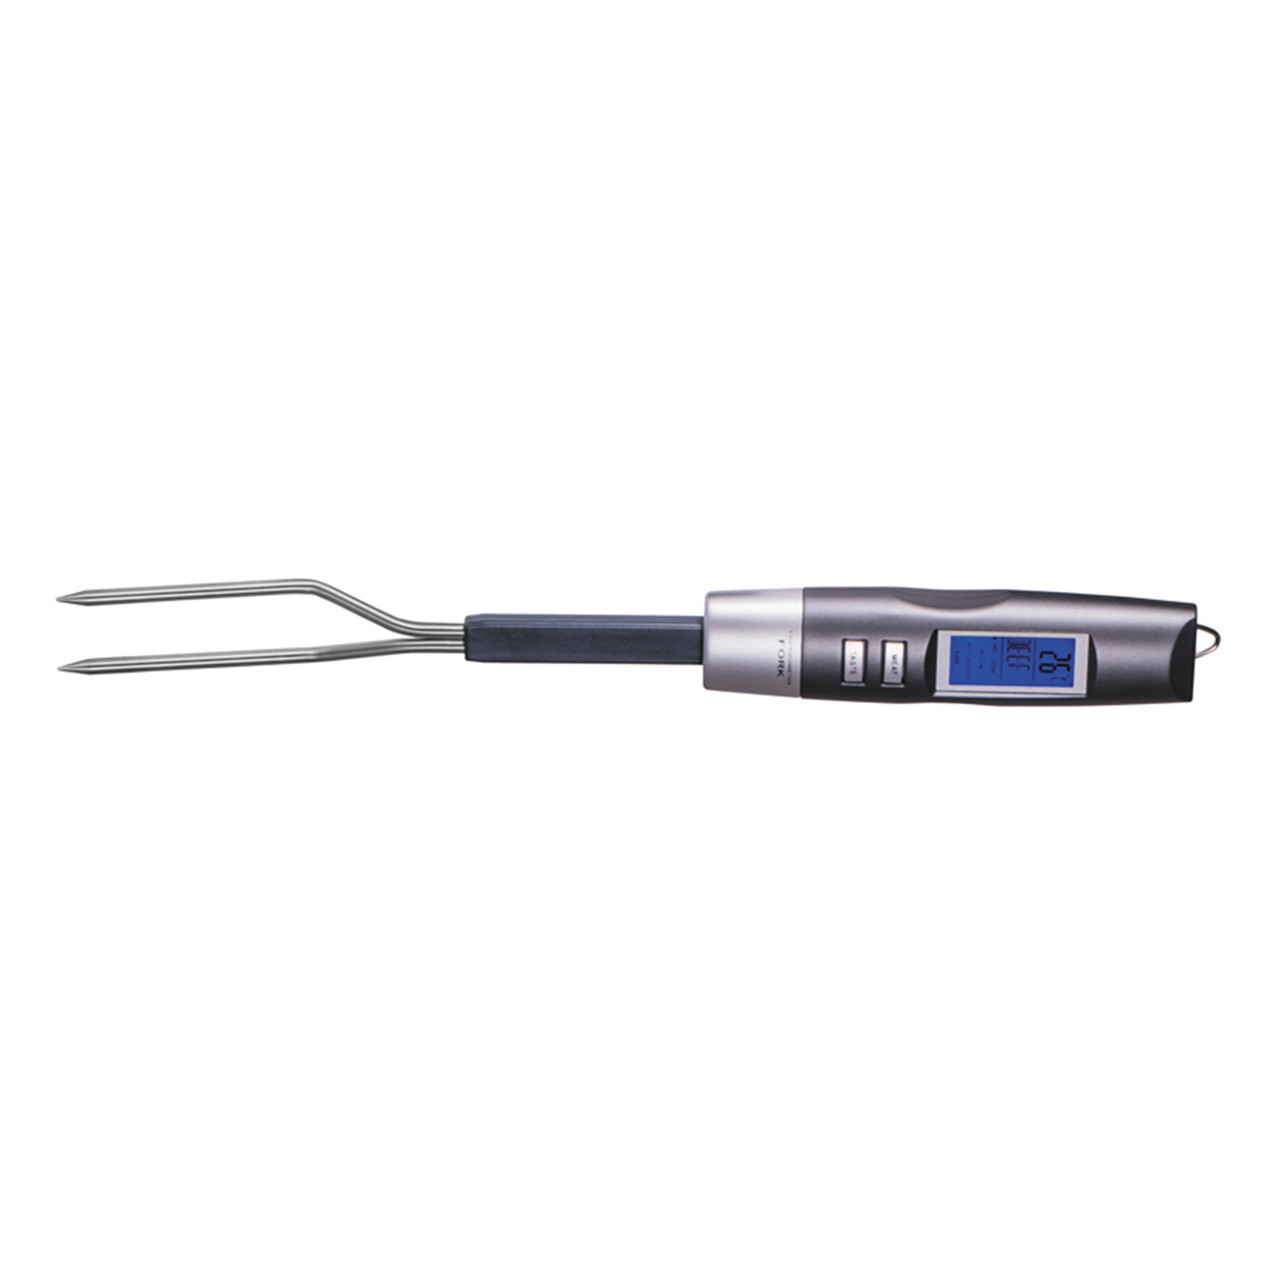 ANGGREK Meat Thermometer, Thermometer Grill Fork, Digital Meat